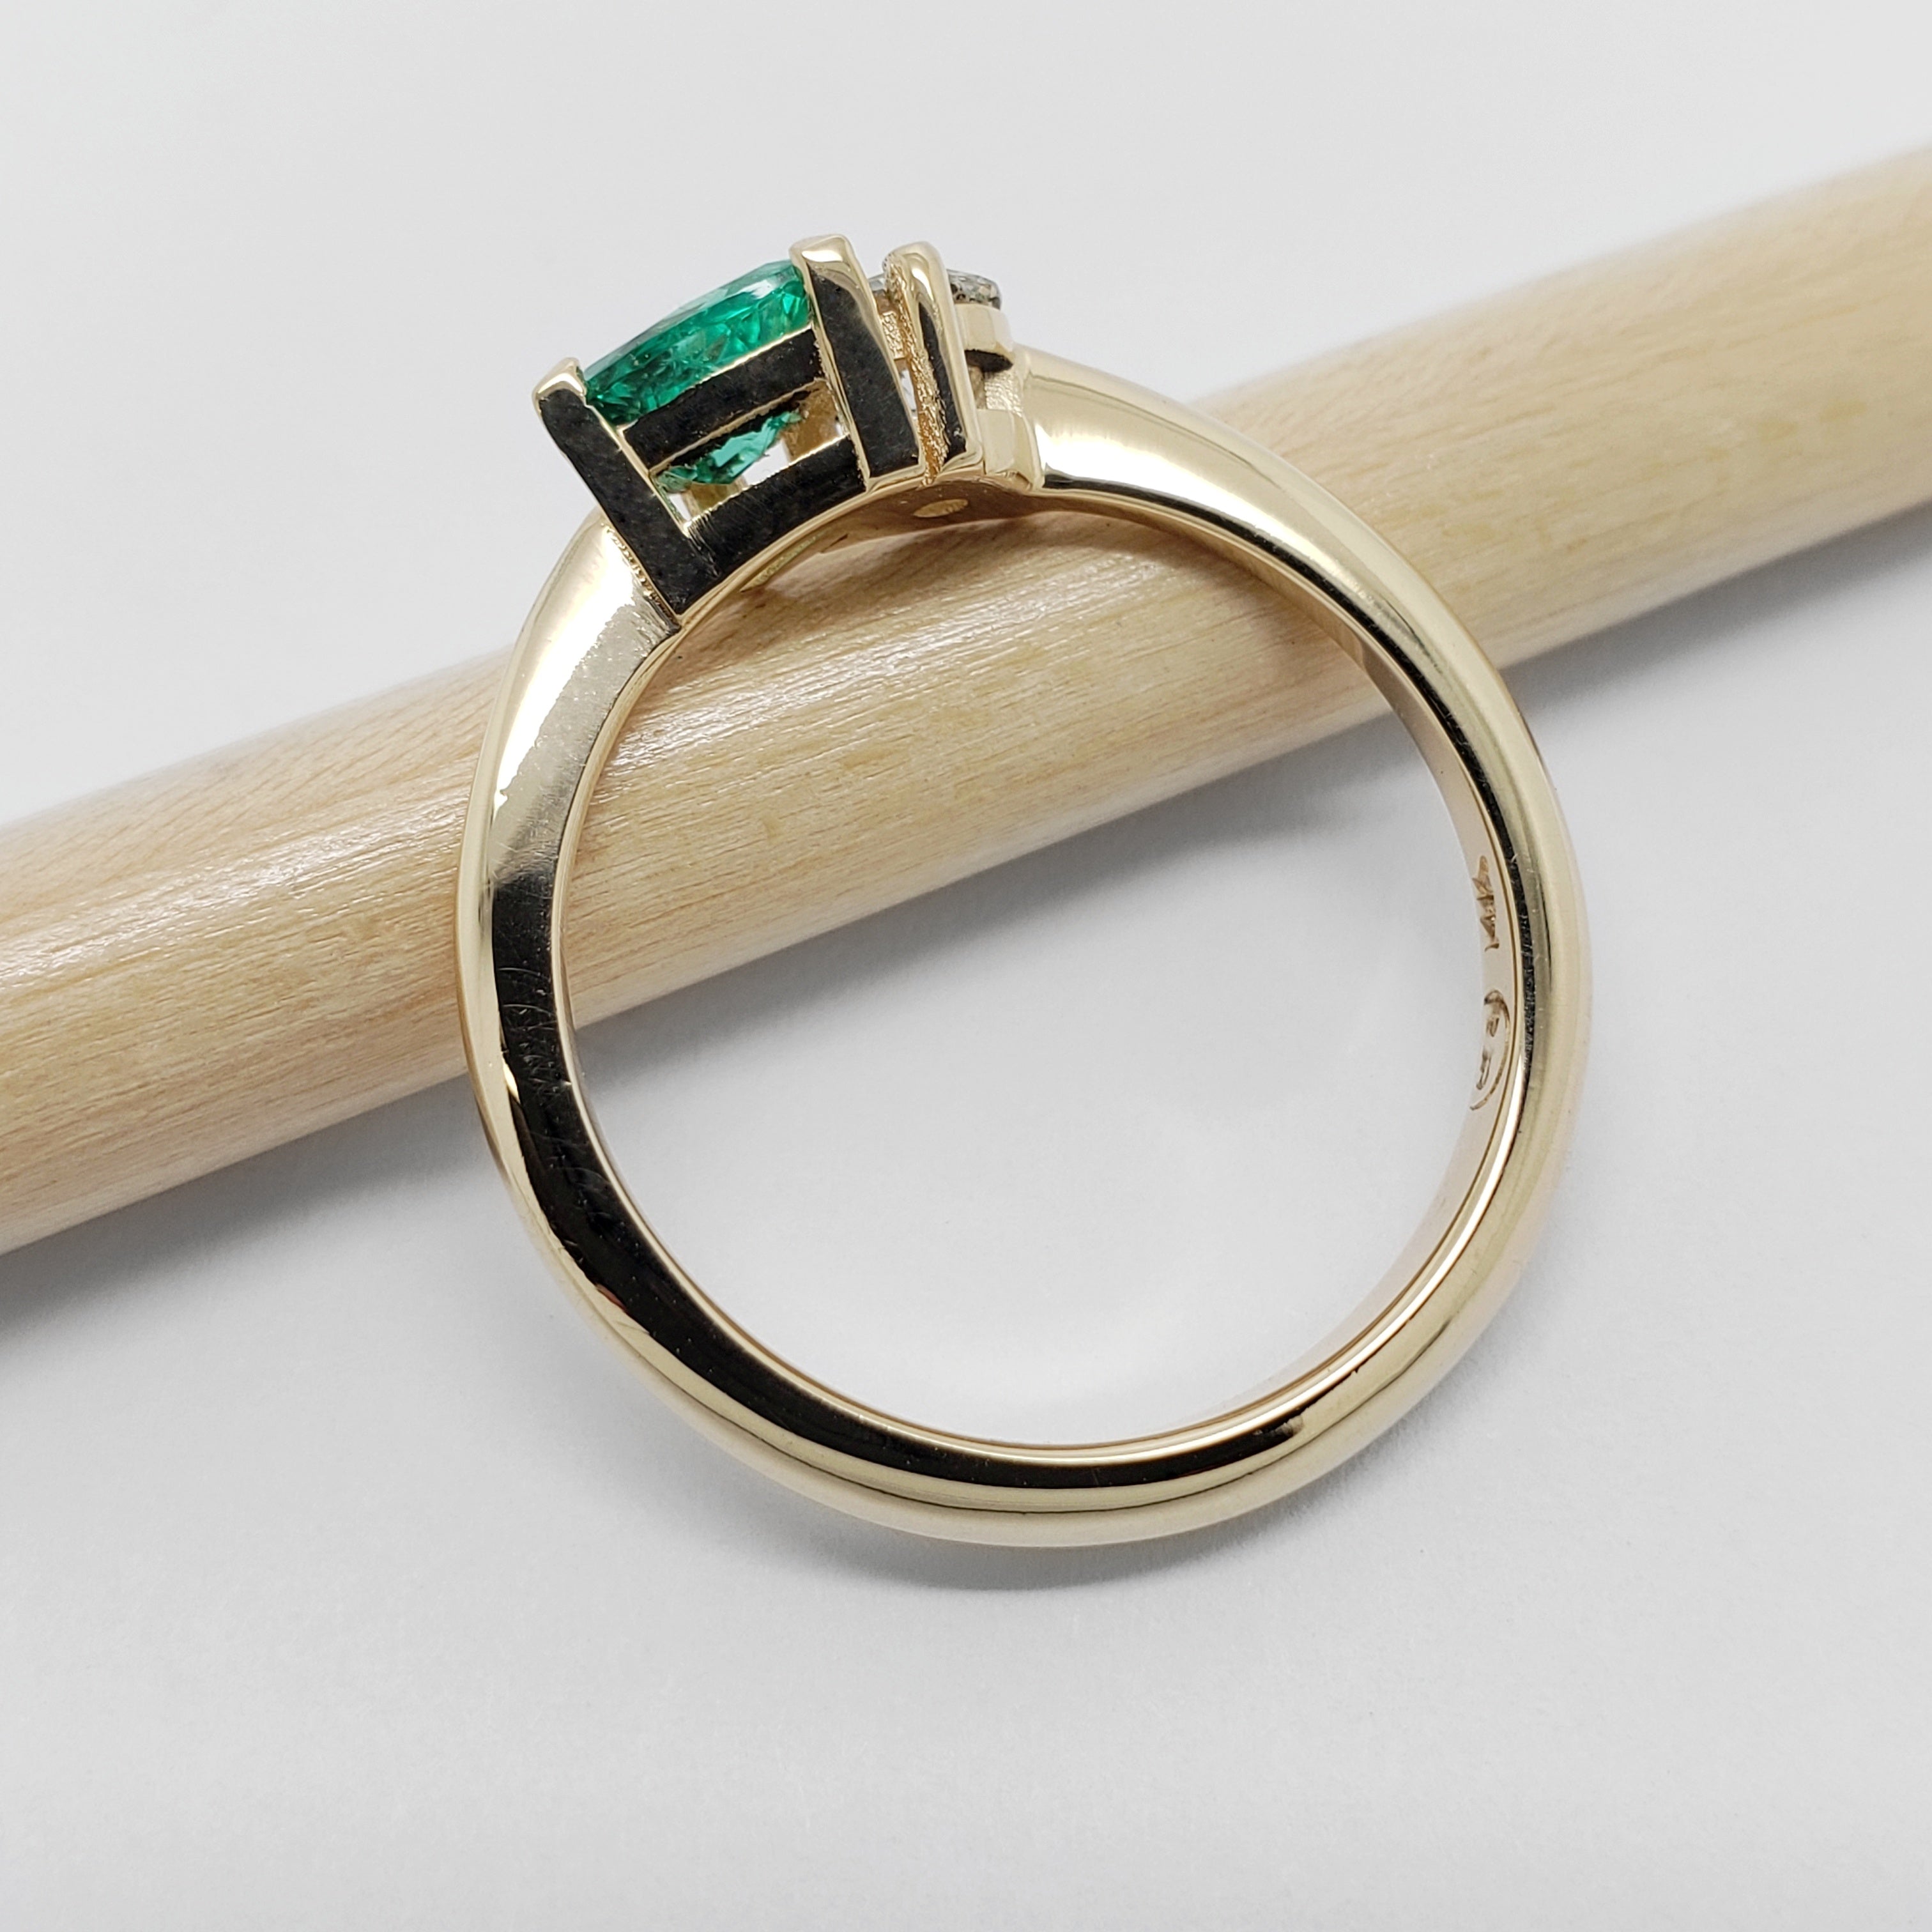 Emerald and Canadian Diamond Engagement Ring | Era Design Vancouver Canada